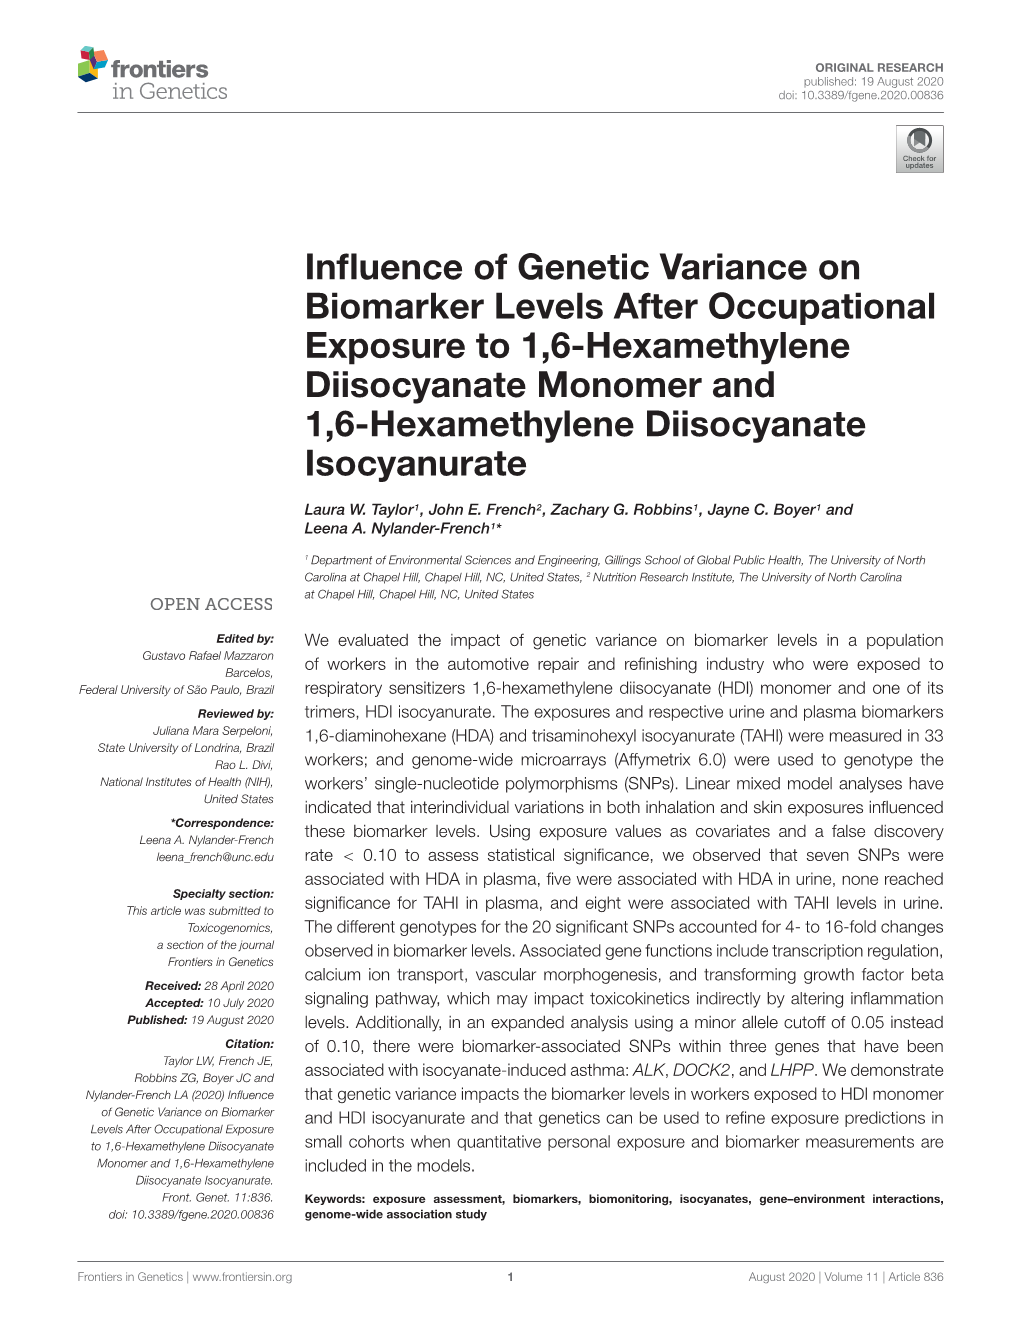 Influence of Genetic Variance on Biomarker Levels After